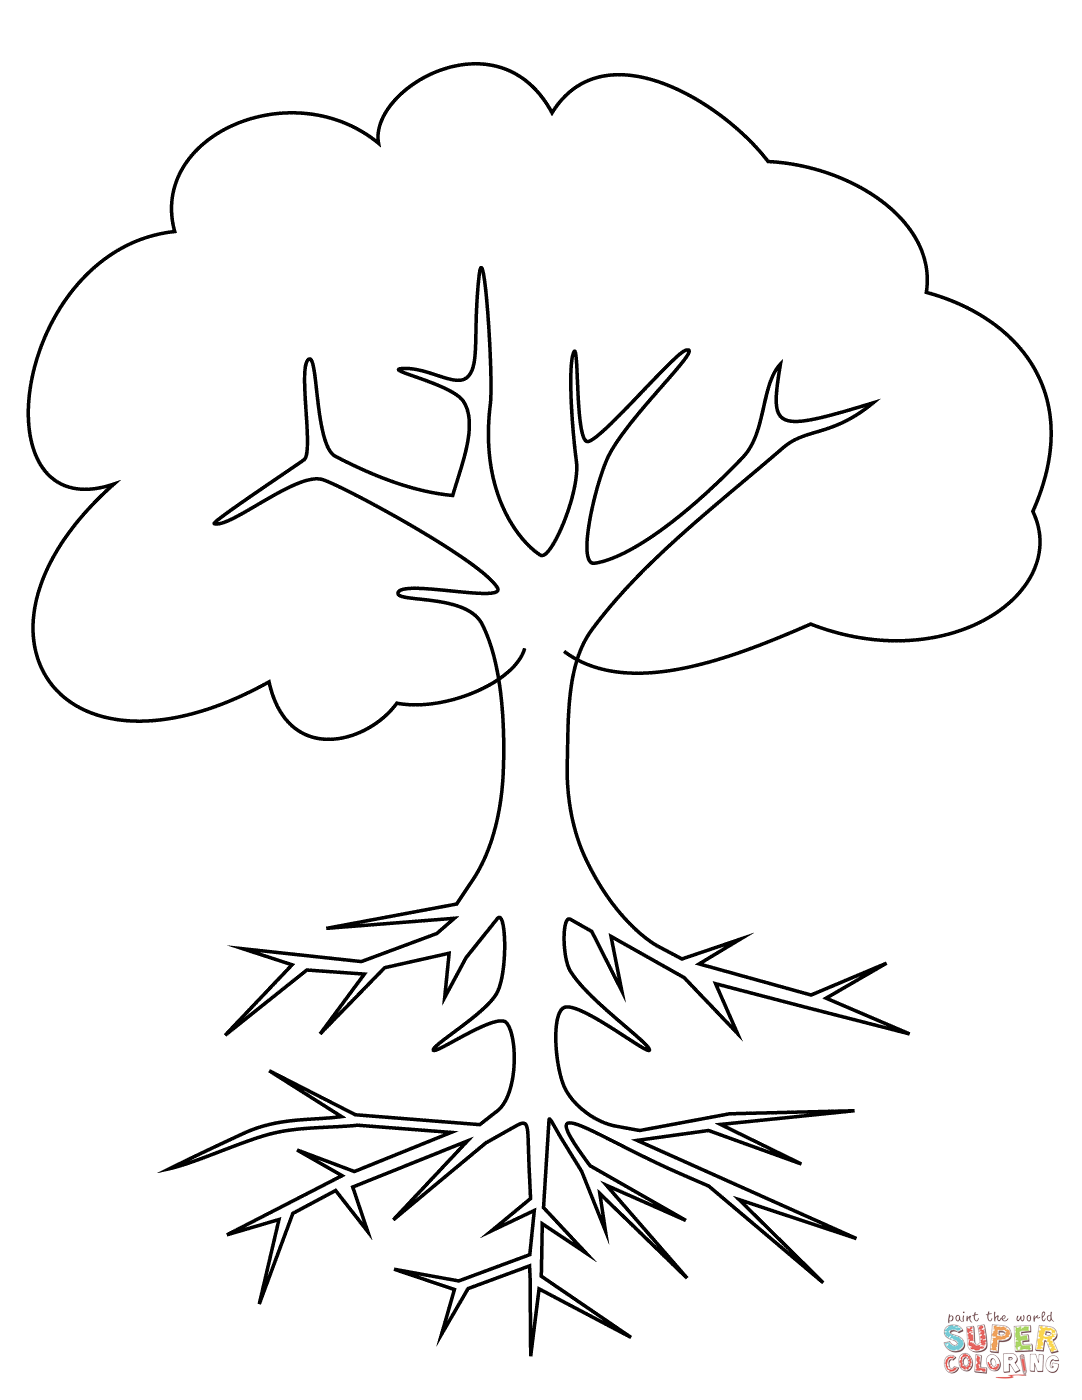 Roots coloring #16, Download drawings